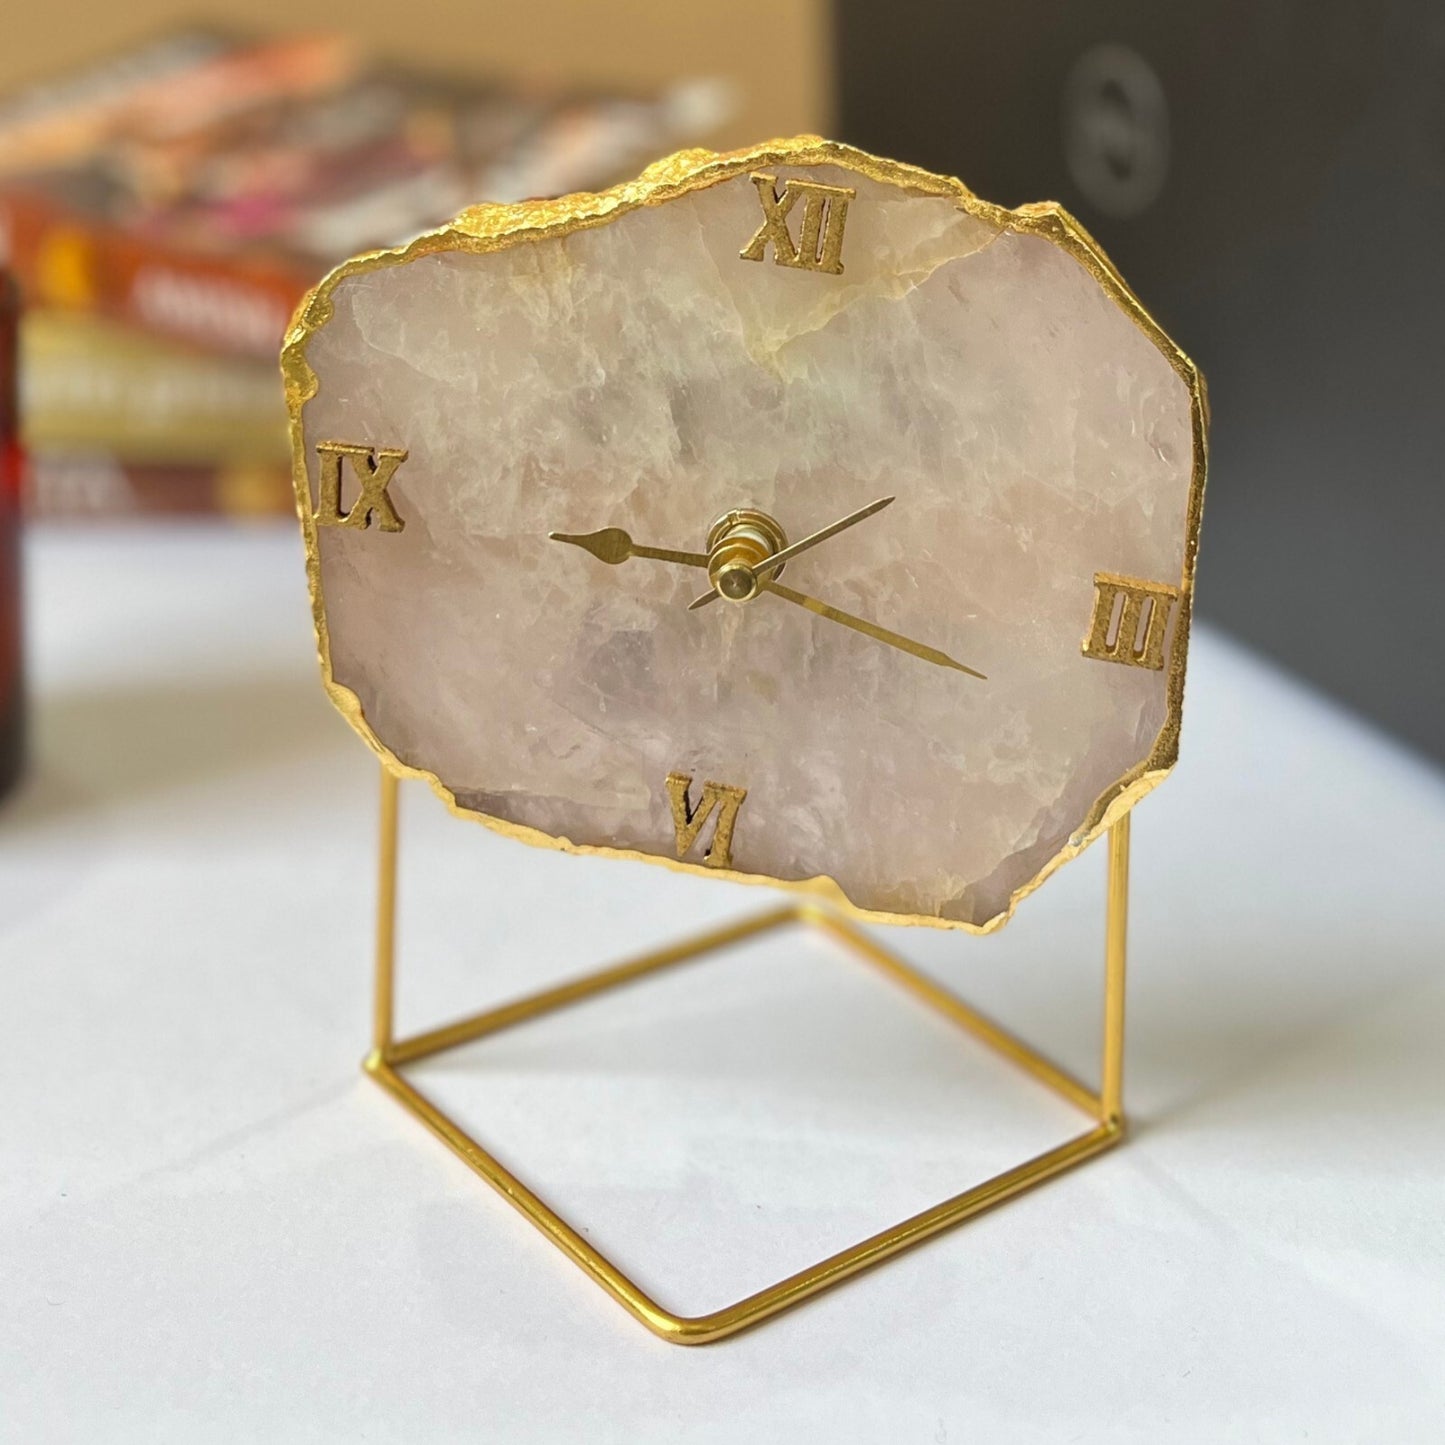 Rose Quartz Desktop Clock with Metal Stand Unique Style Table Clock for Office Home Decor Handmade Items Wedding Gift Bedroom Living Room- Pink